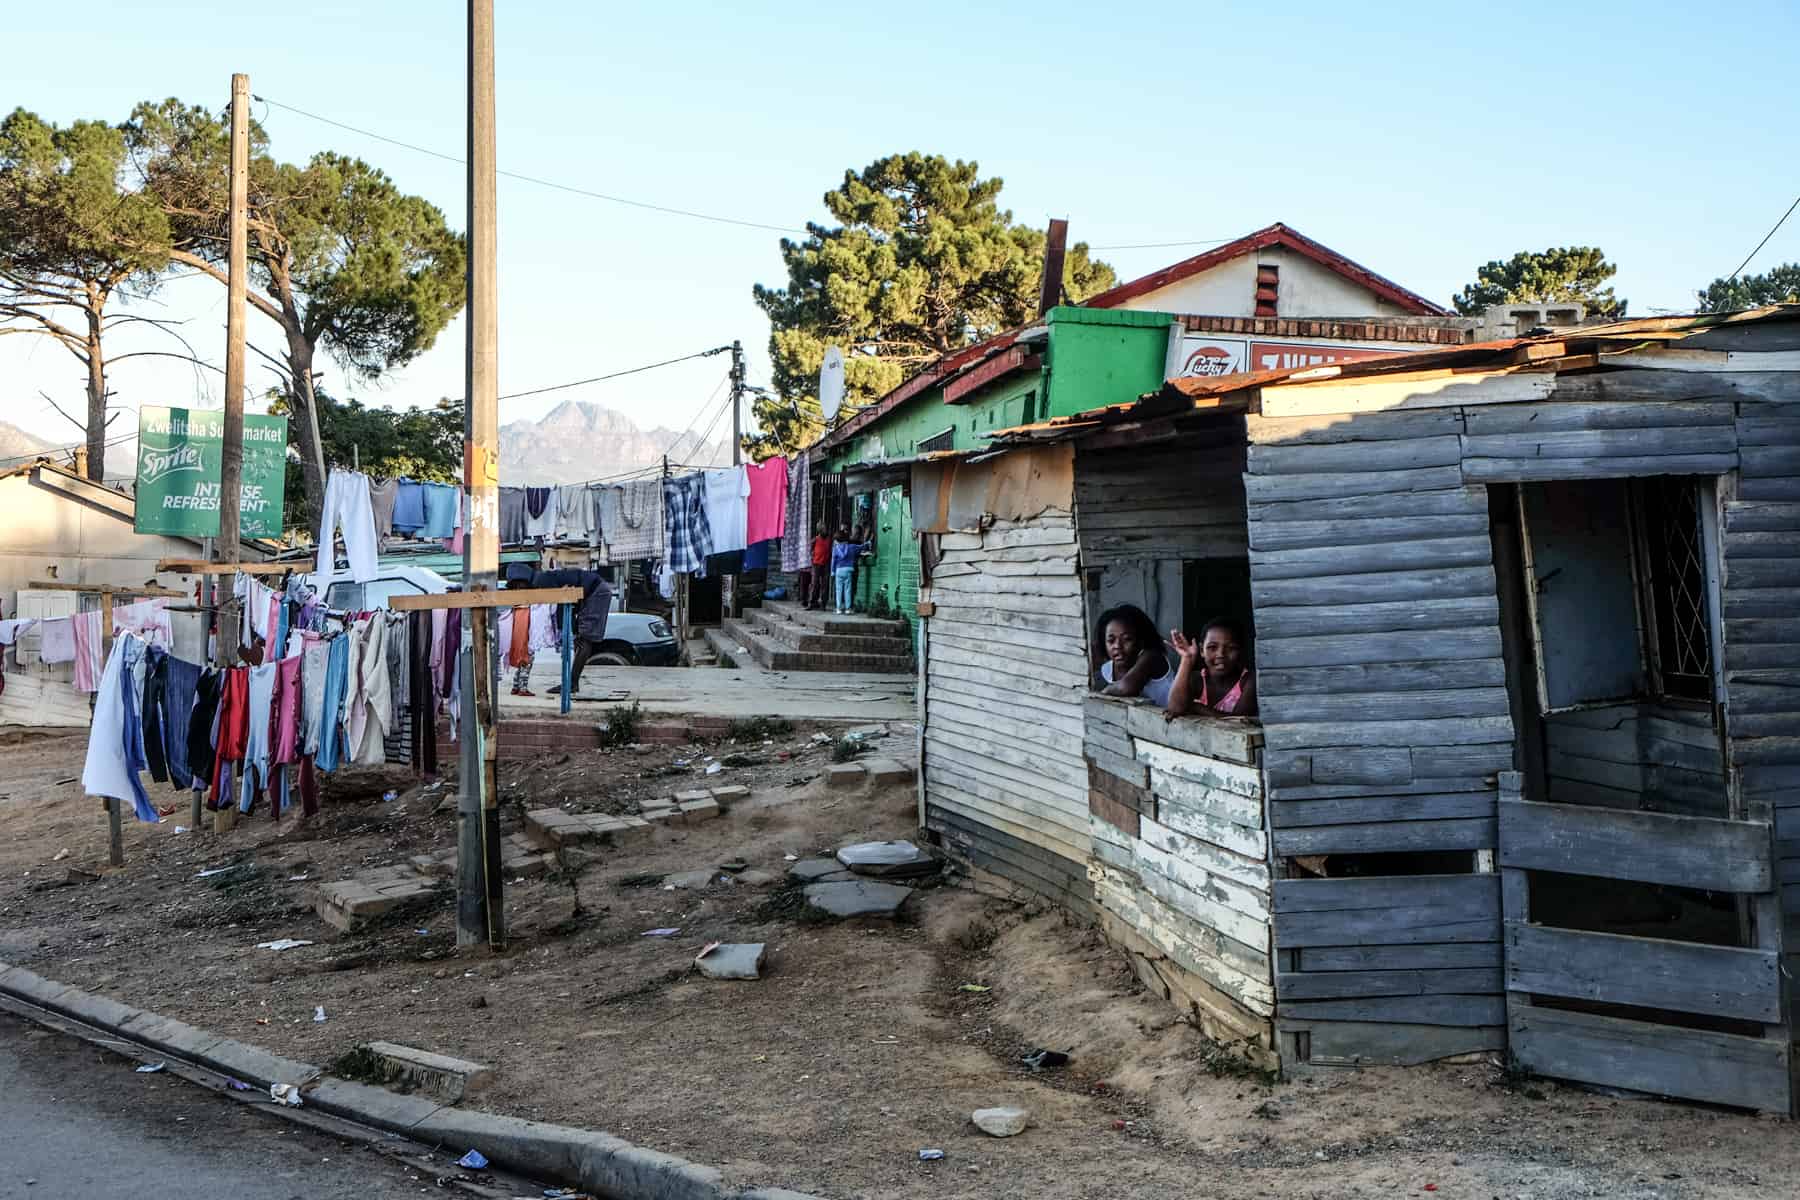 Two girls waves from their slanted wooden house in Kayamandi township in South Africa next to a dirt path with a washing line